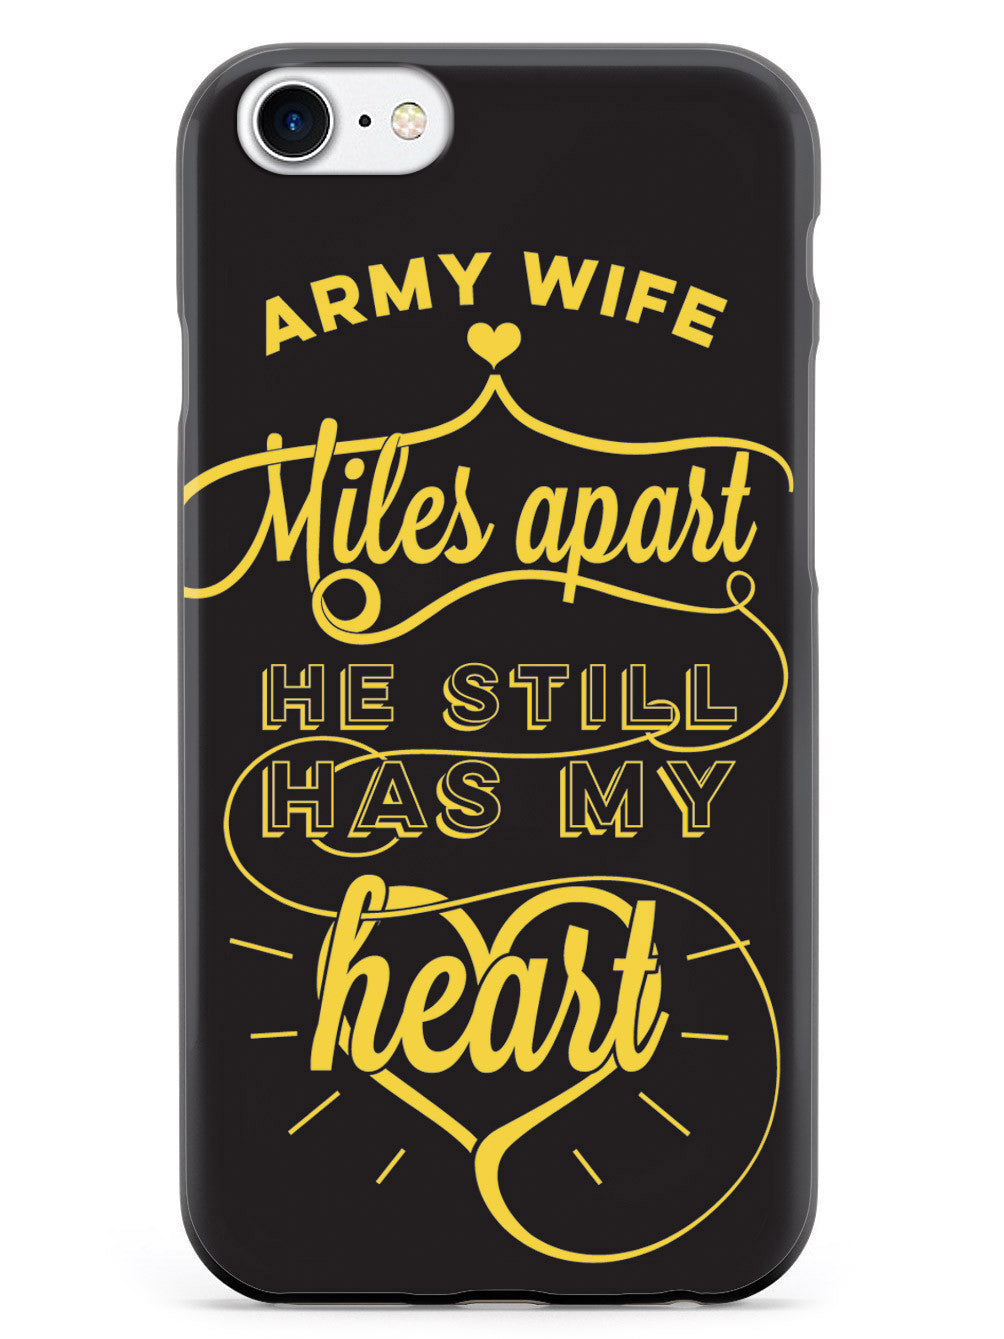 Army Wife - Miles Apart, Still Has My Heart Case